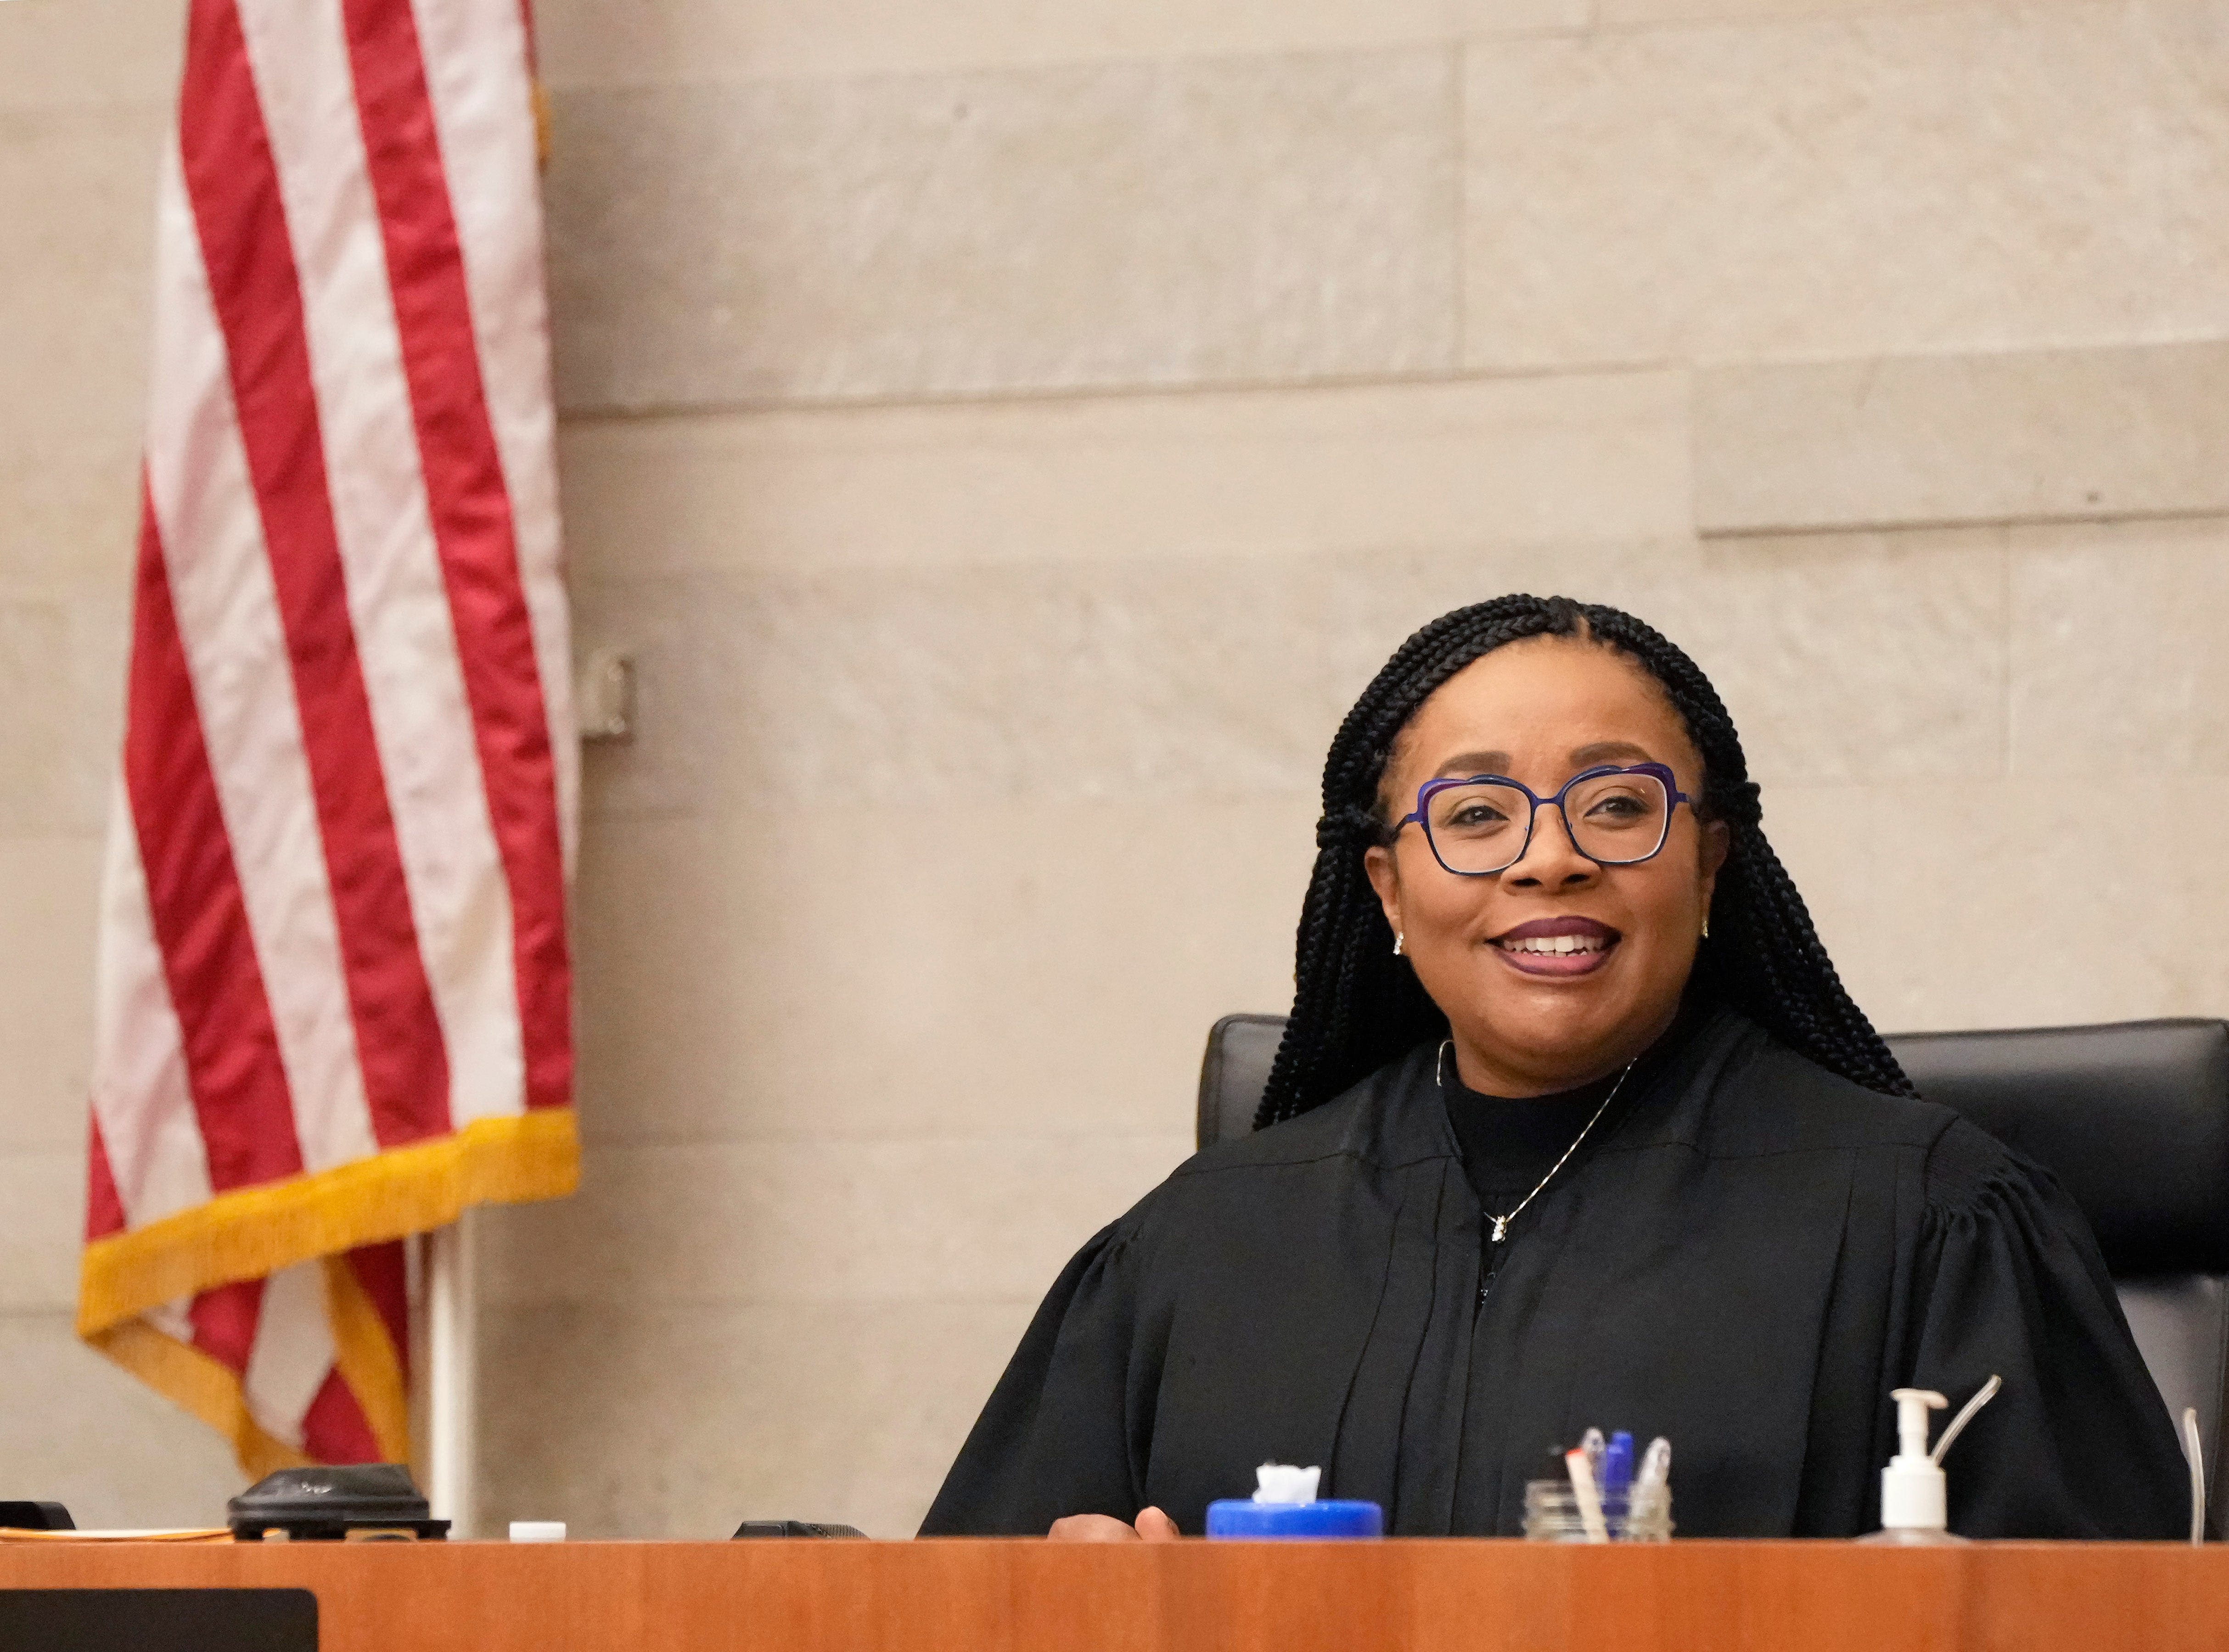 Federal complaint filed by Ohio judge accuses fellow judges of racism, harassment